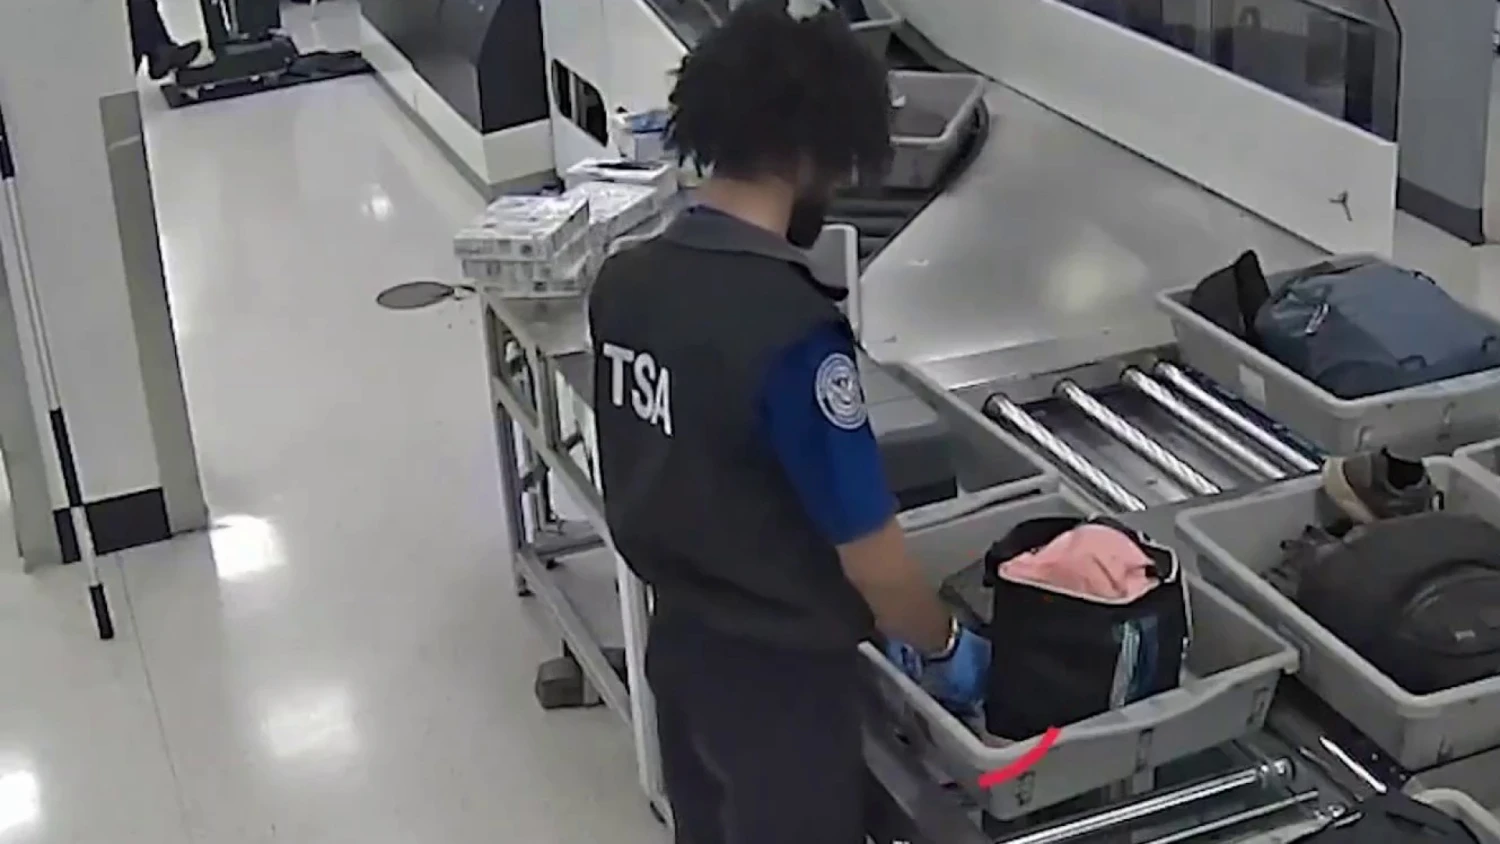 Alleged luggage theft at US airport caught on CCTV